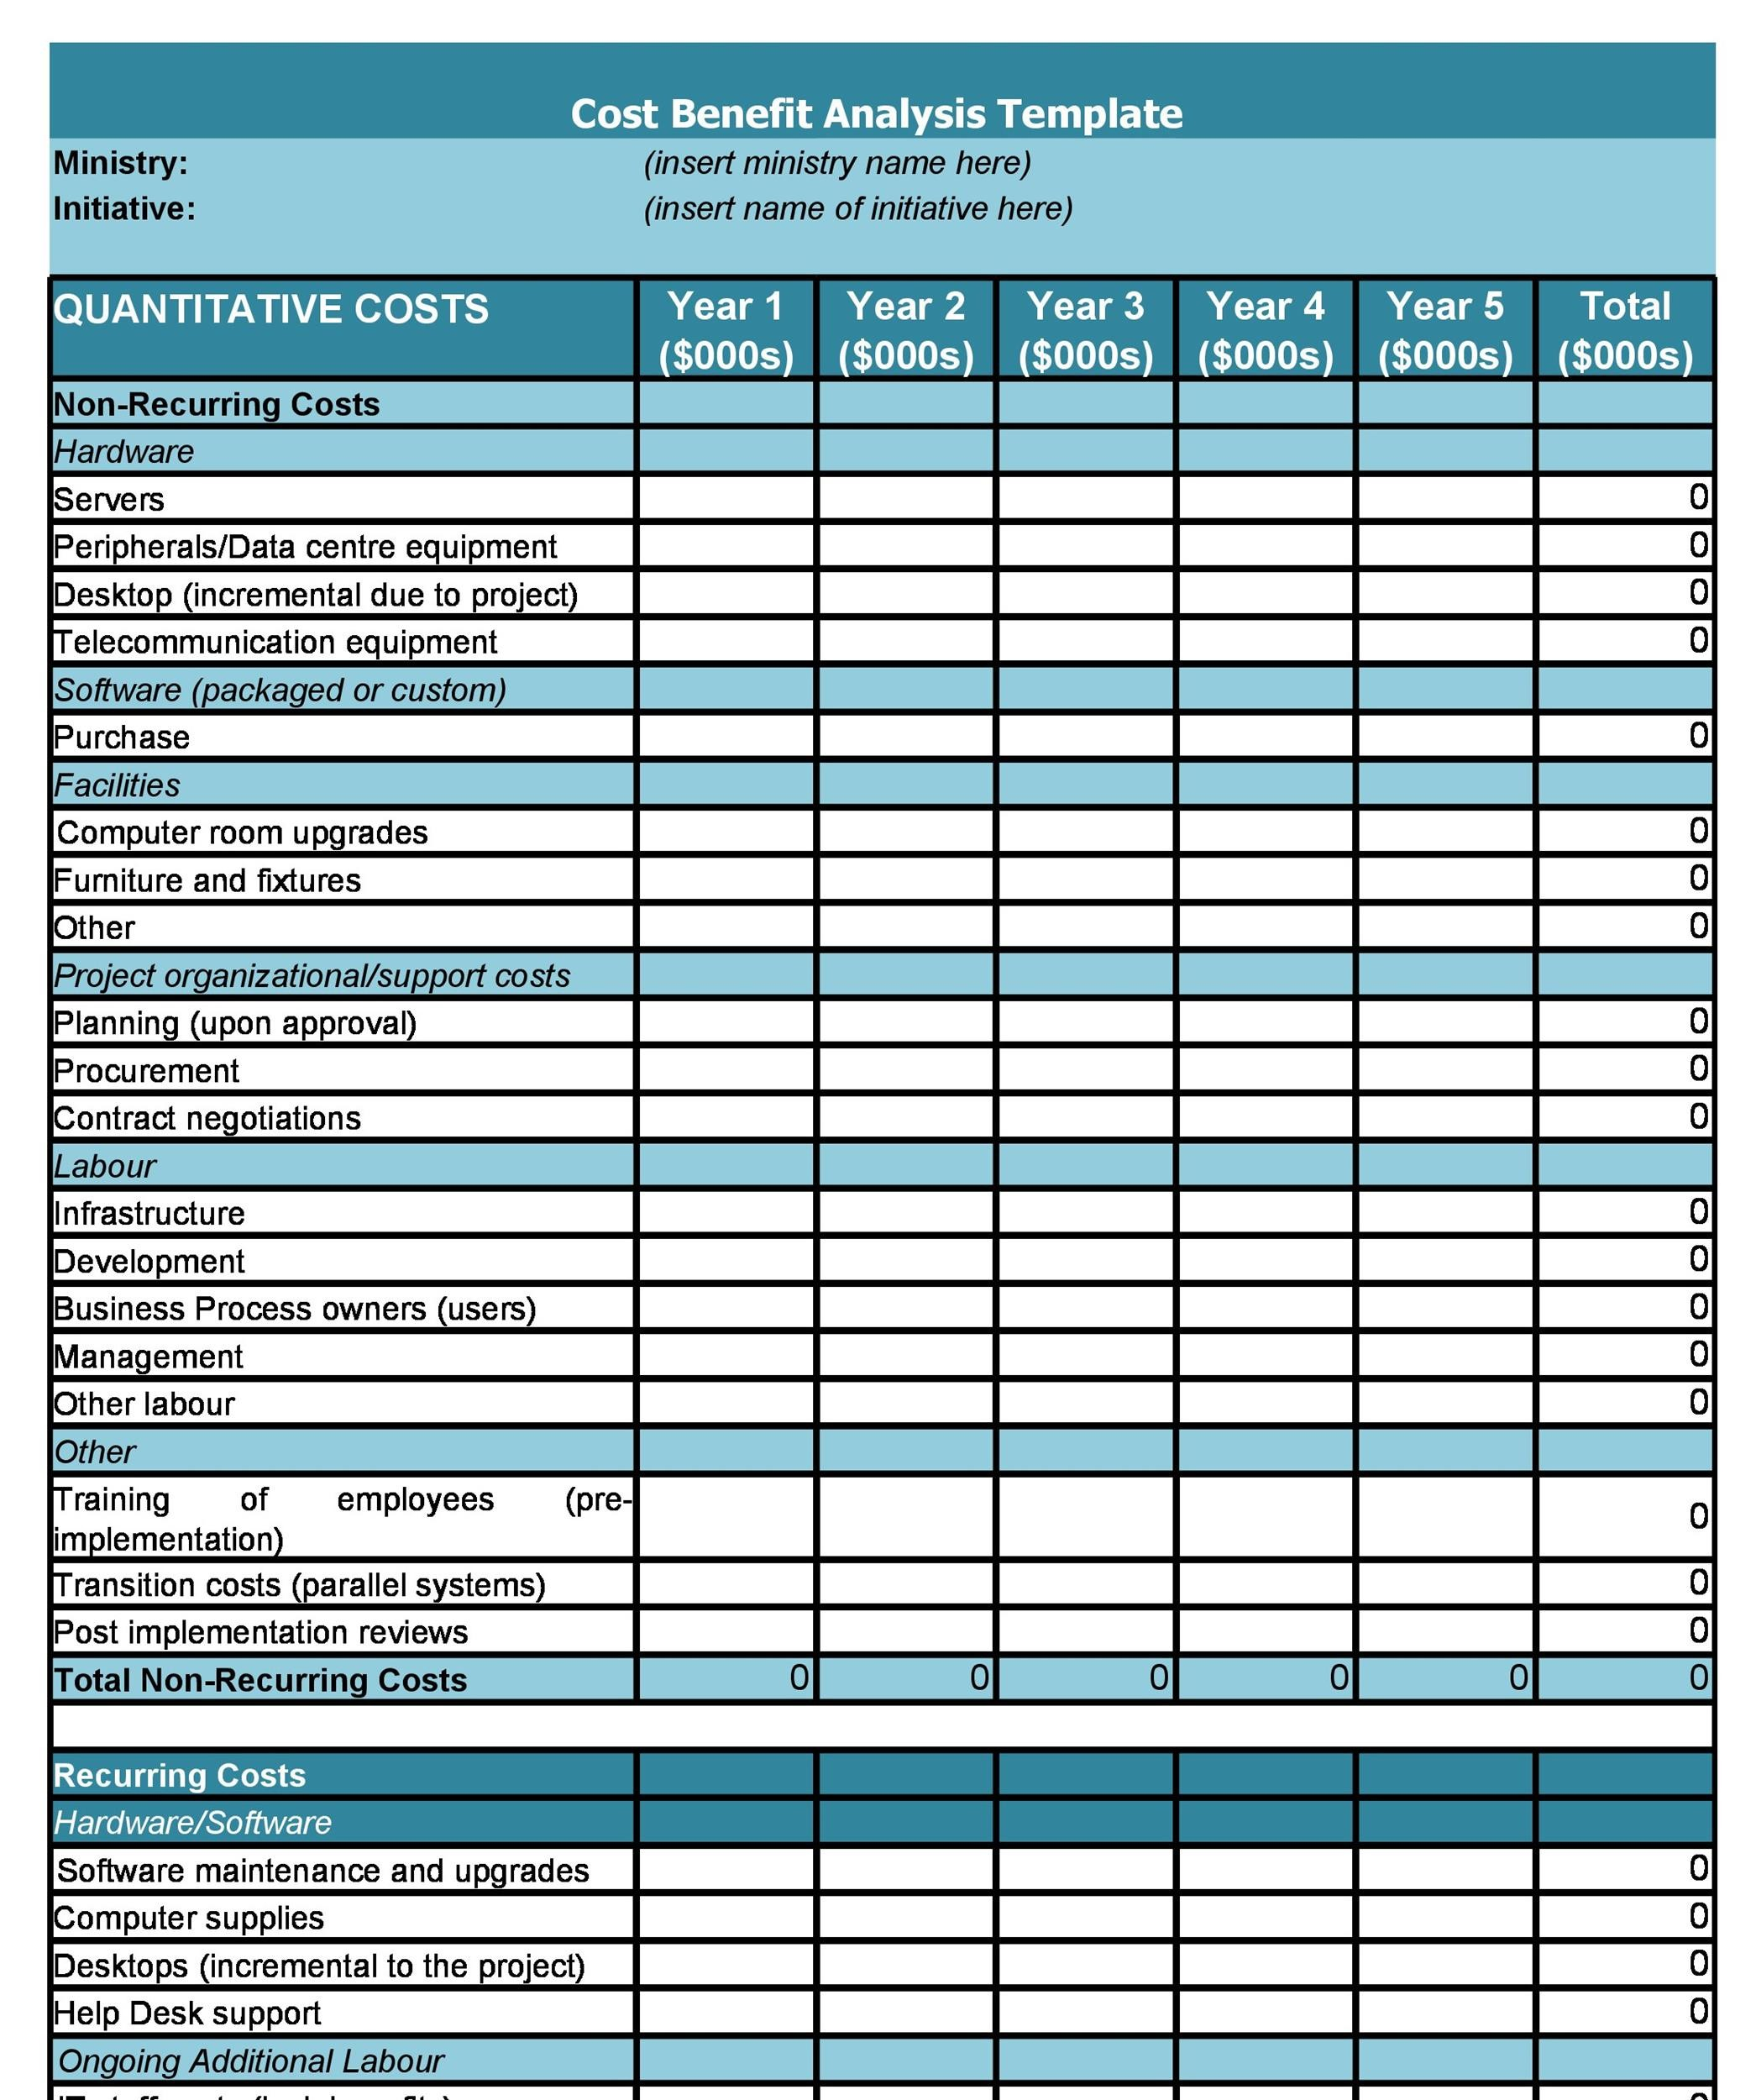 11+ Cost Benefit Analysis Templates & Examples! ᐅ TemplateLab Within Project Management Cost Benefit Analysis Template For Project Management Cost Benefit Analysis Template